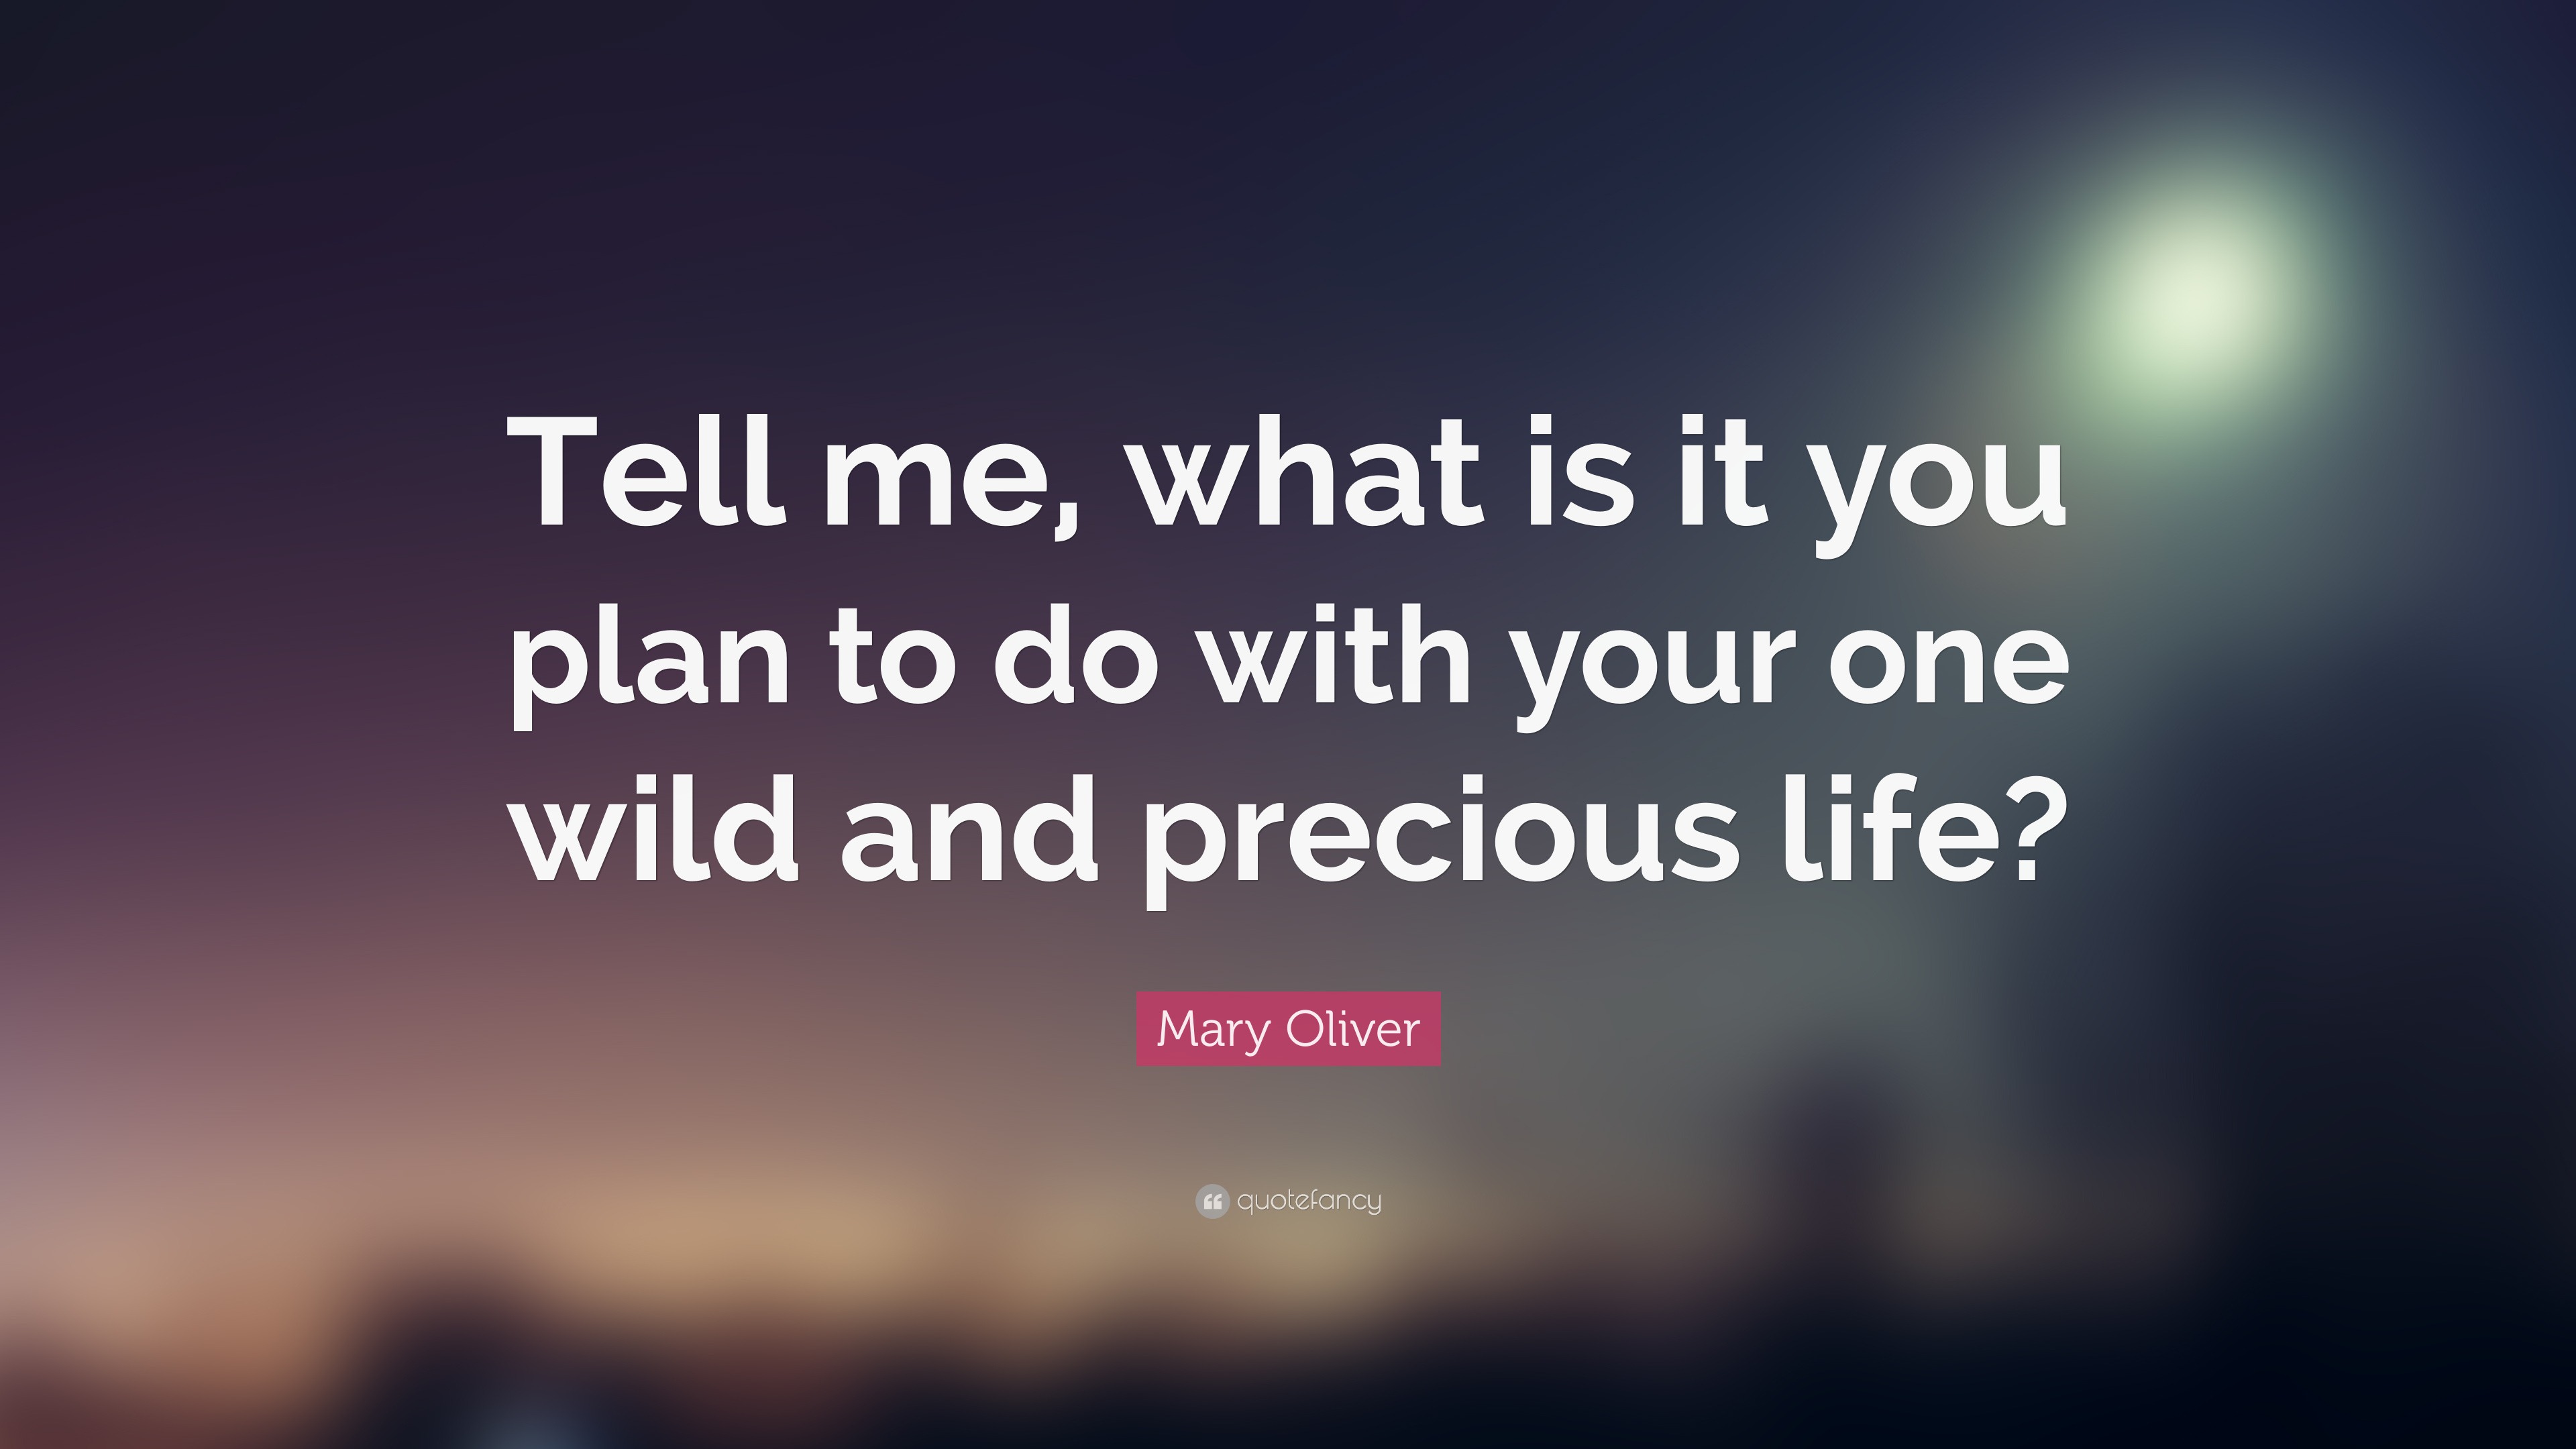 Mary Oliver Quote: “Tell me, what is it you plan to do with your one